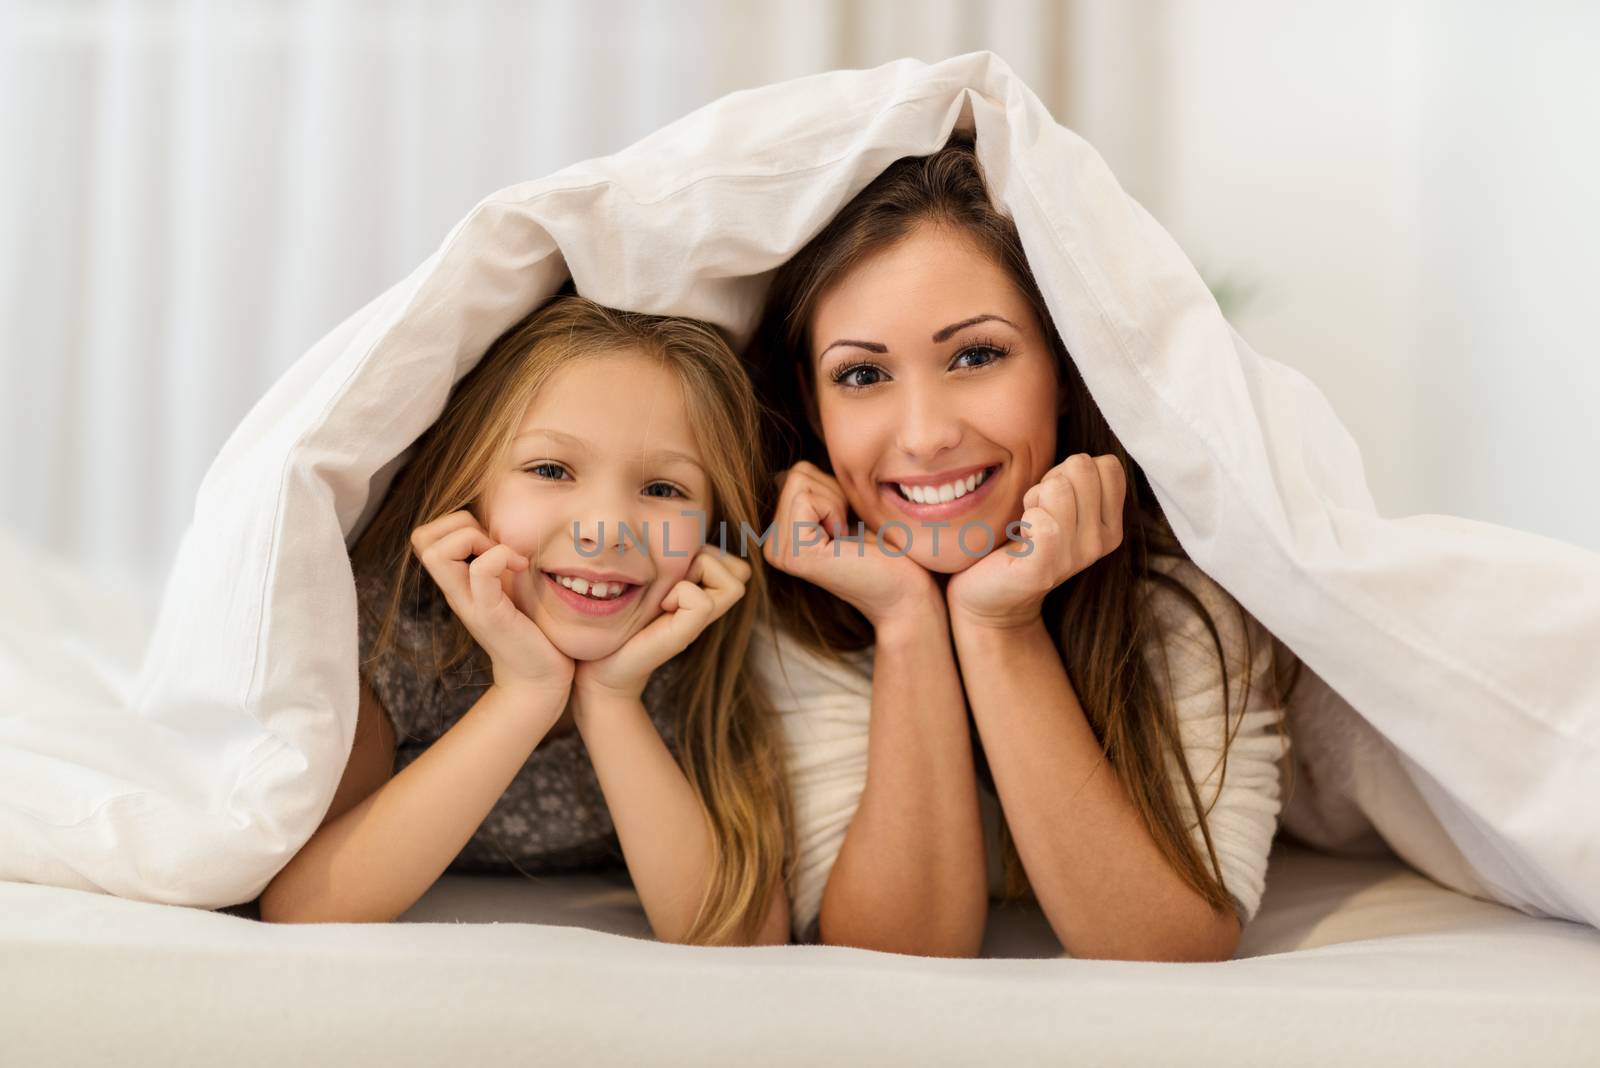 Beautiful smiling mother and her daughter having fun in bed. They lie in bed looking at camera and peeking under the blanket with smile.